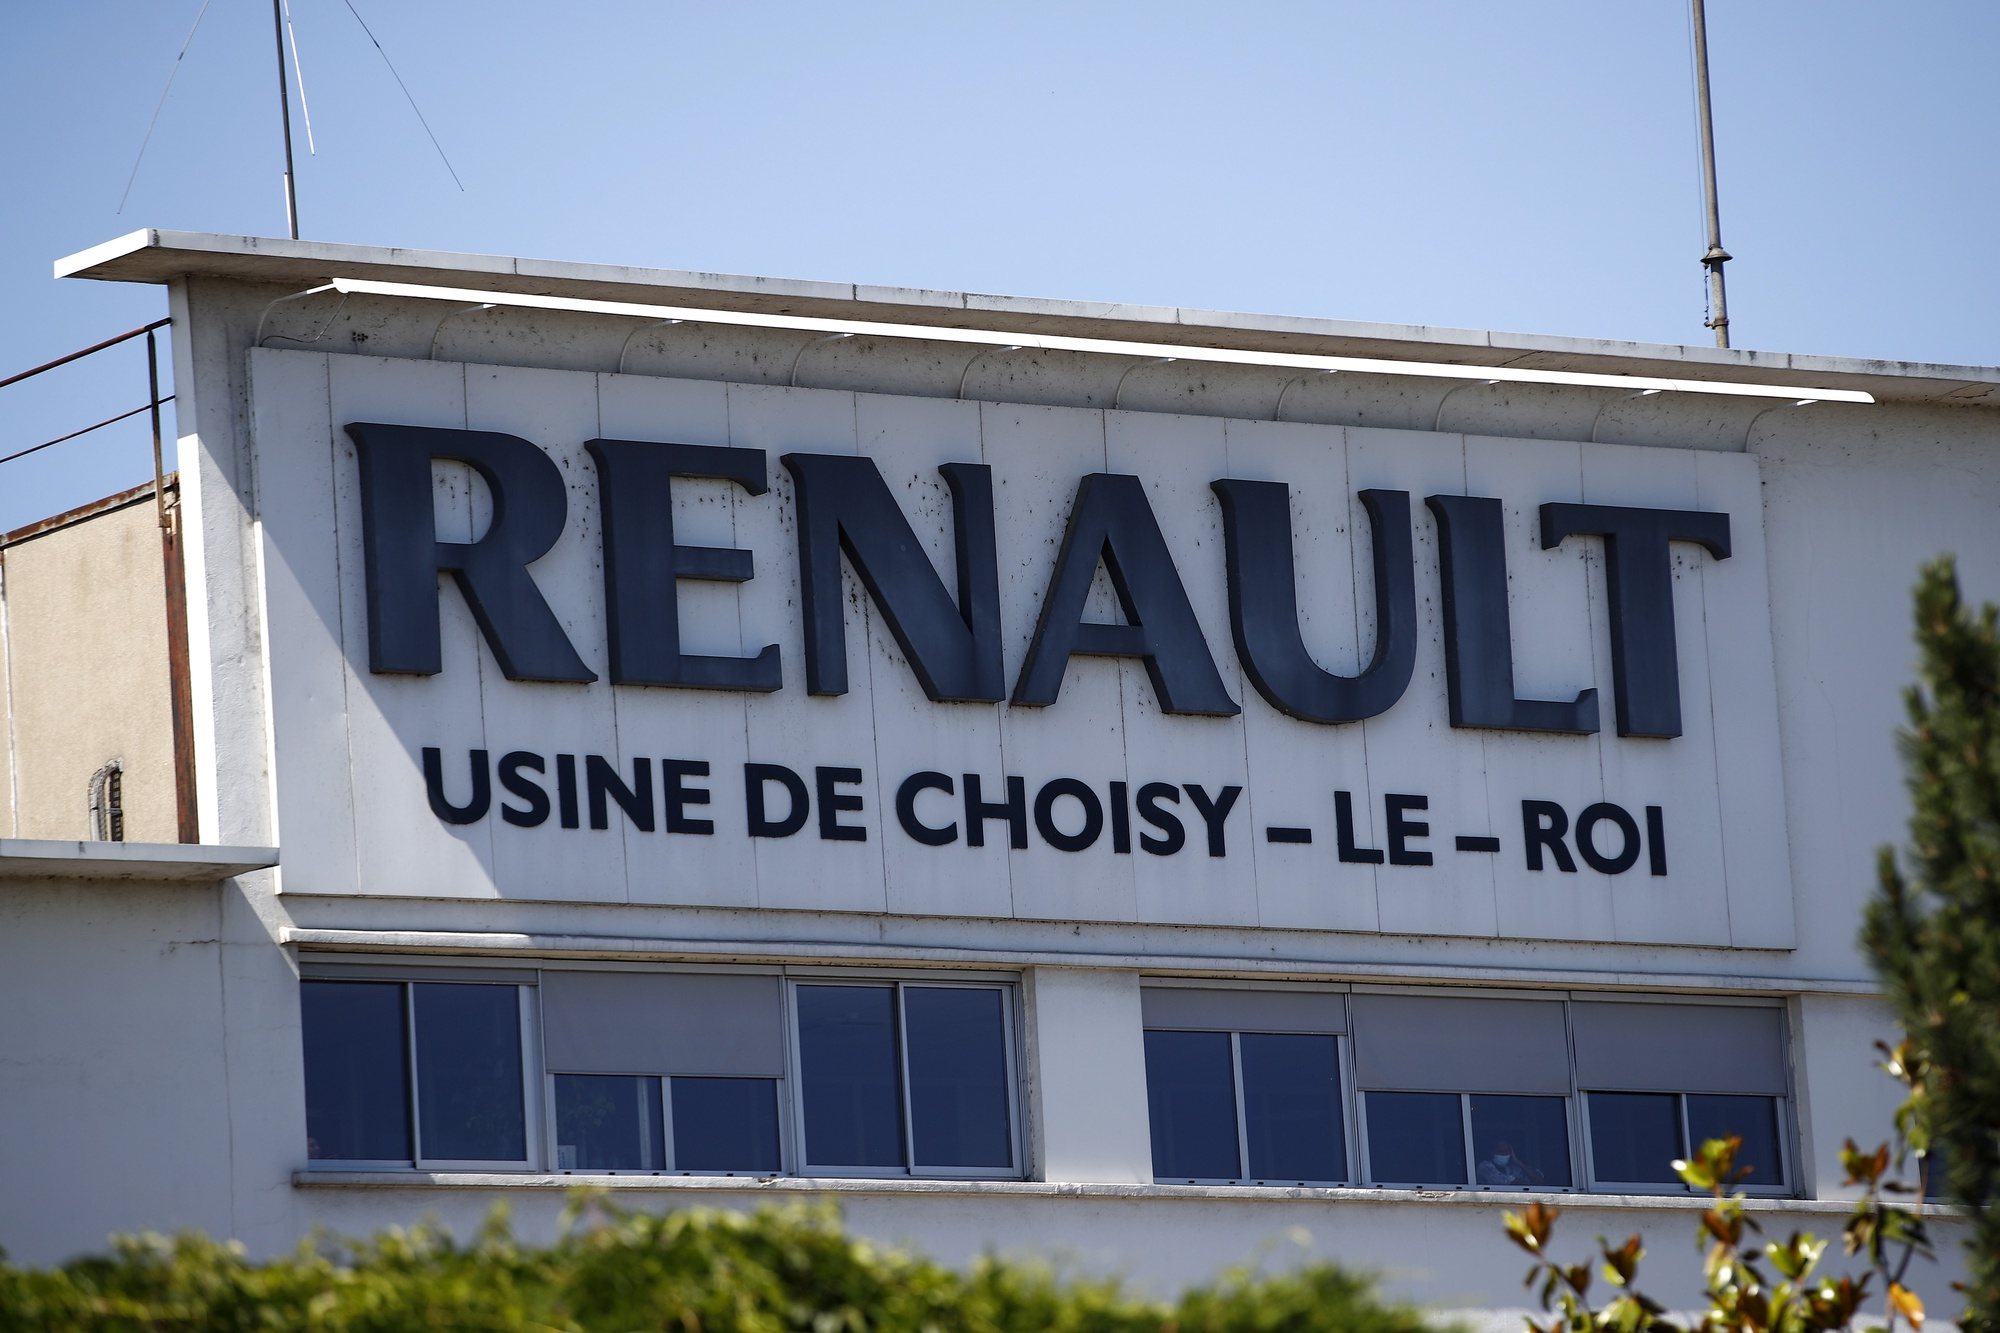 epa08451501 Outside view of the French car manufacturer Renault site in Choisy-le-Roi, France, 29 May 2020. French carmaker Renault on 29 May announced up to 15,000 layoffs worldwide after the coronavirus pandemic accentuated the drop in demand. The site of Choisy le Roi would be the only one to be closing as announced.  EPA/YOAN VALAT